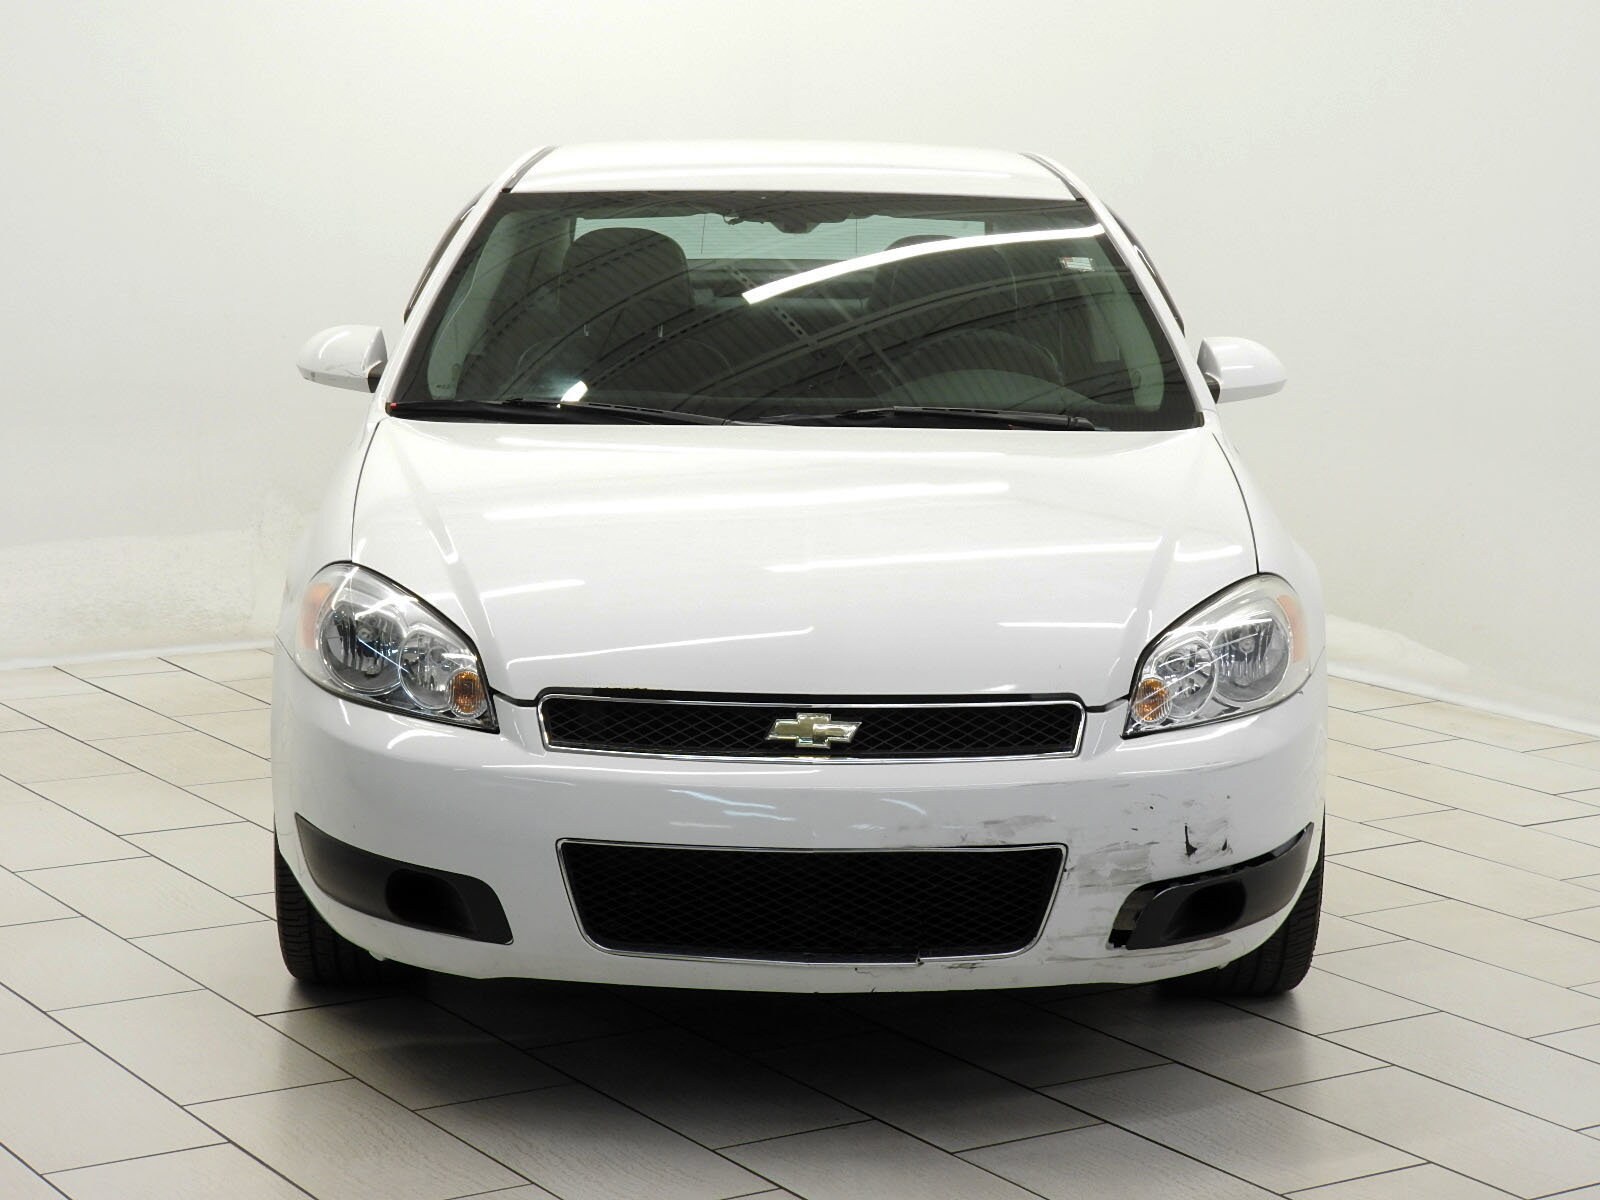 Used 2012 Chevrolet Impala Police Sedan with VIN 2G1WD5E38C1161938 for sale in Charlotte, NC